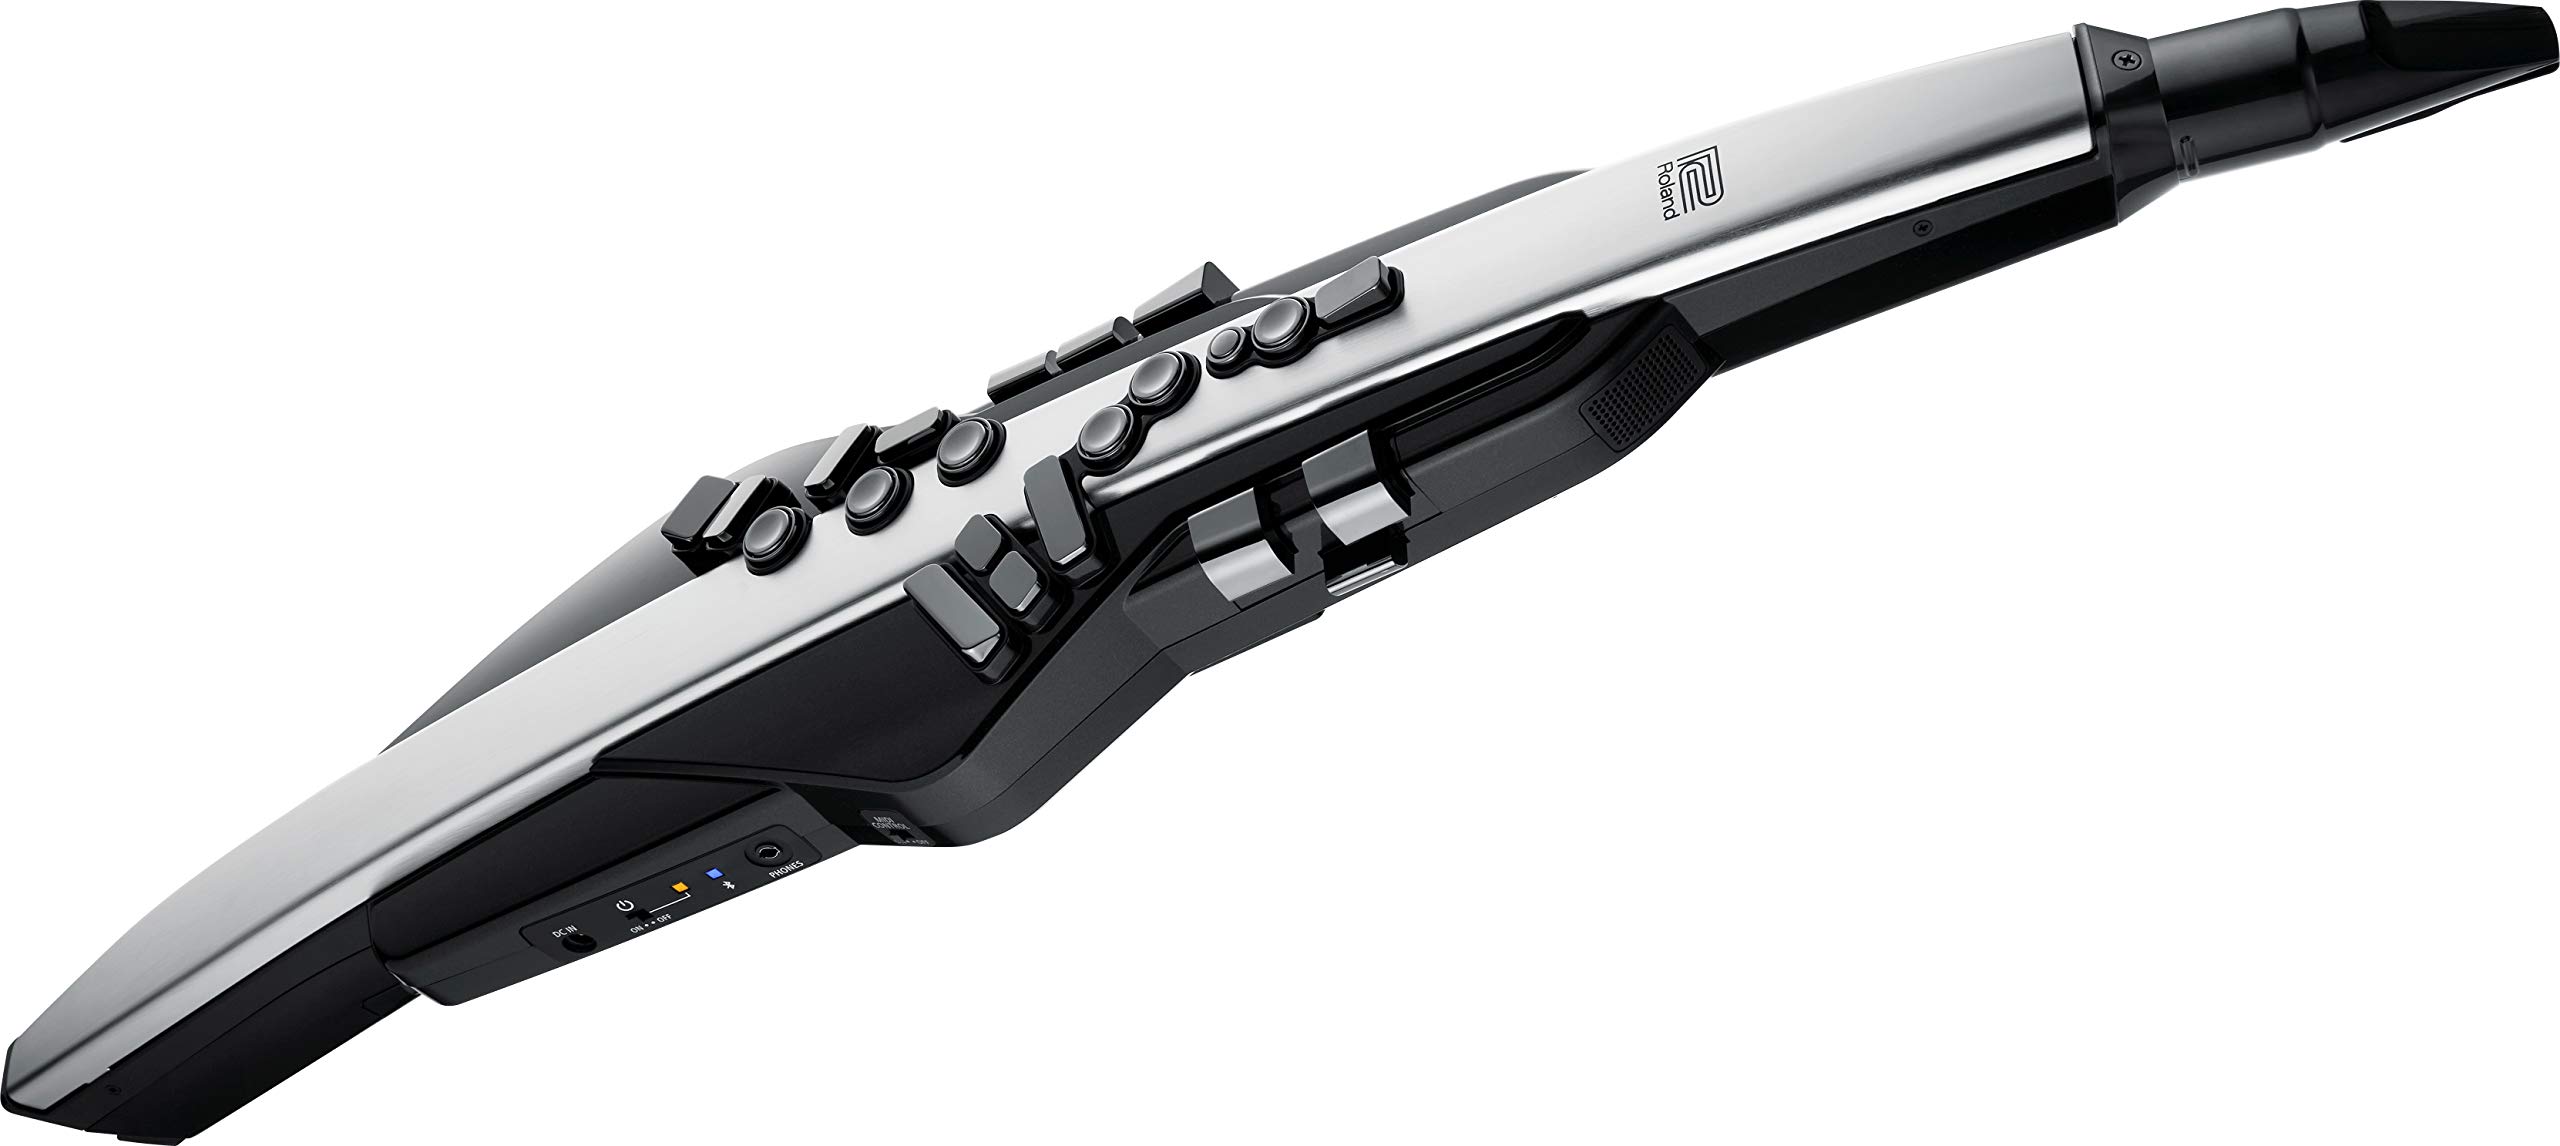 Roland  Aerophone Pro Digital Wind Instrument, Professional-Grade with Refined Design, Premium Components, and Advanced Sound Engines (AE-30)